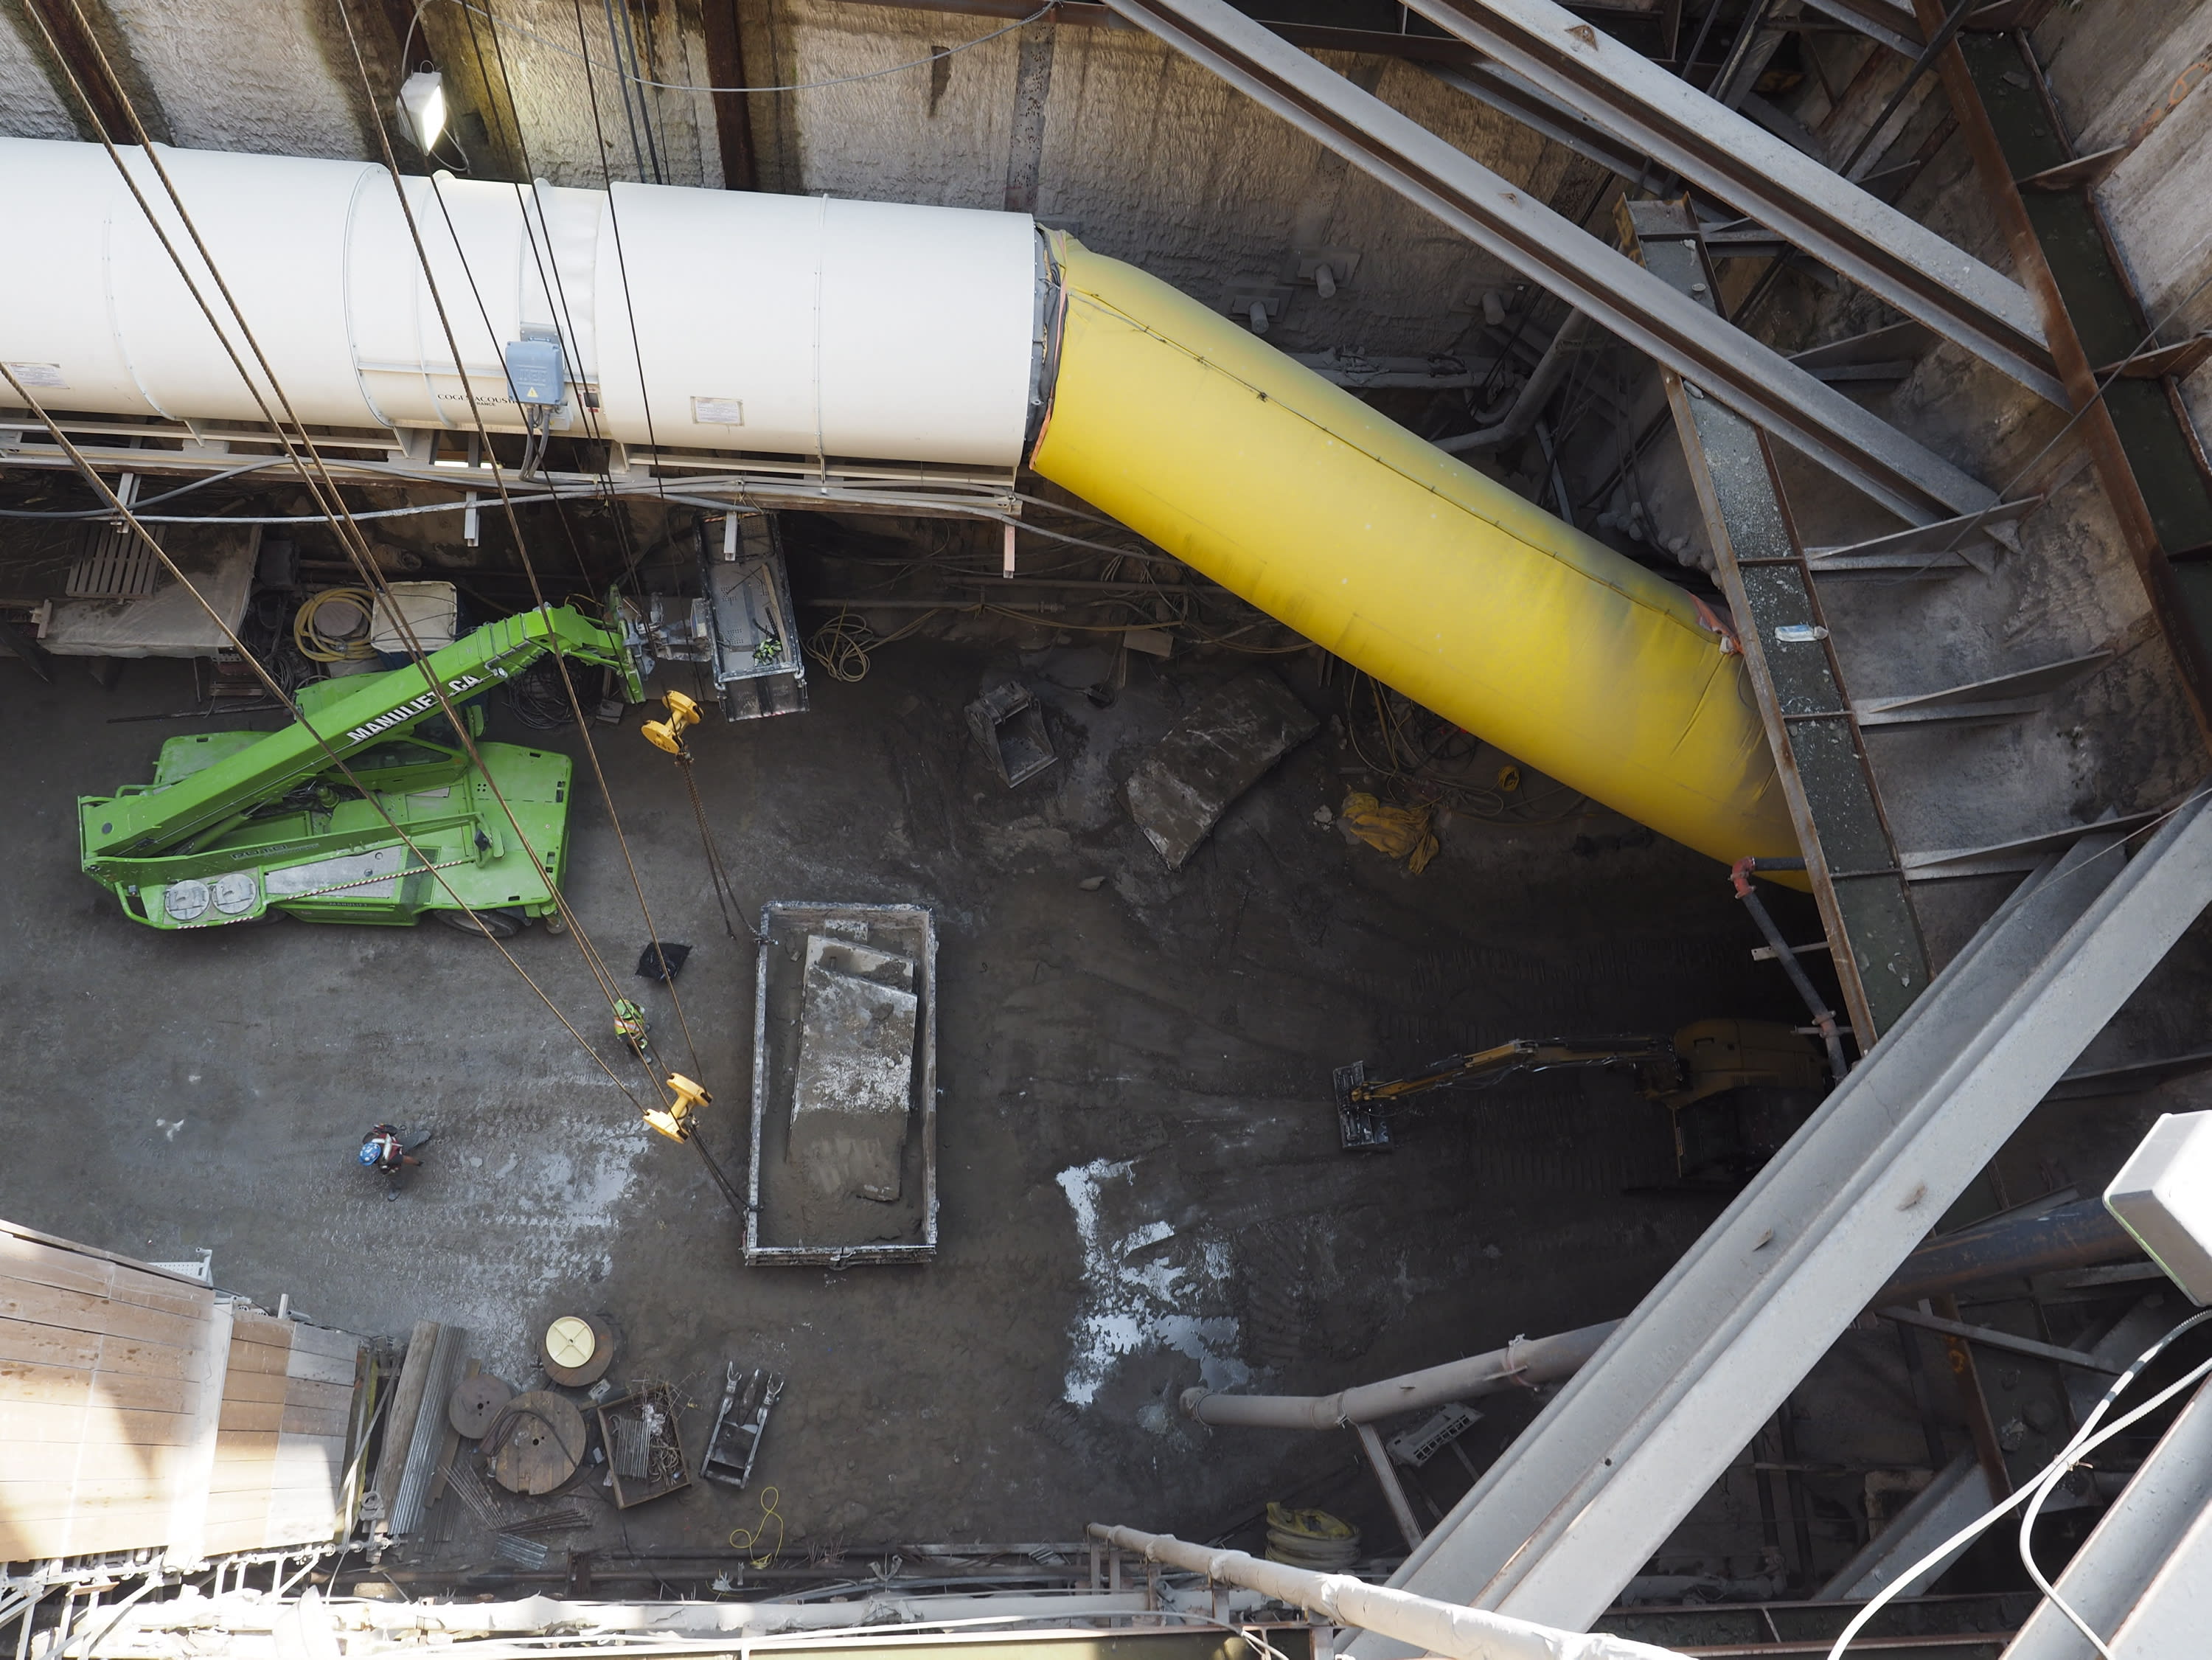 A photo shows down into a pit under construction - lots of dirt and equipment.